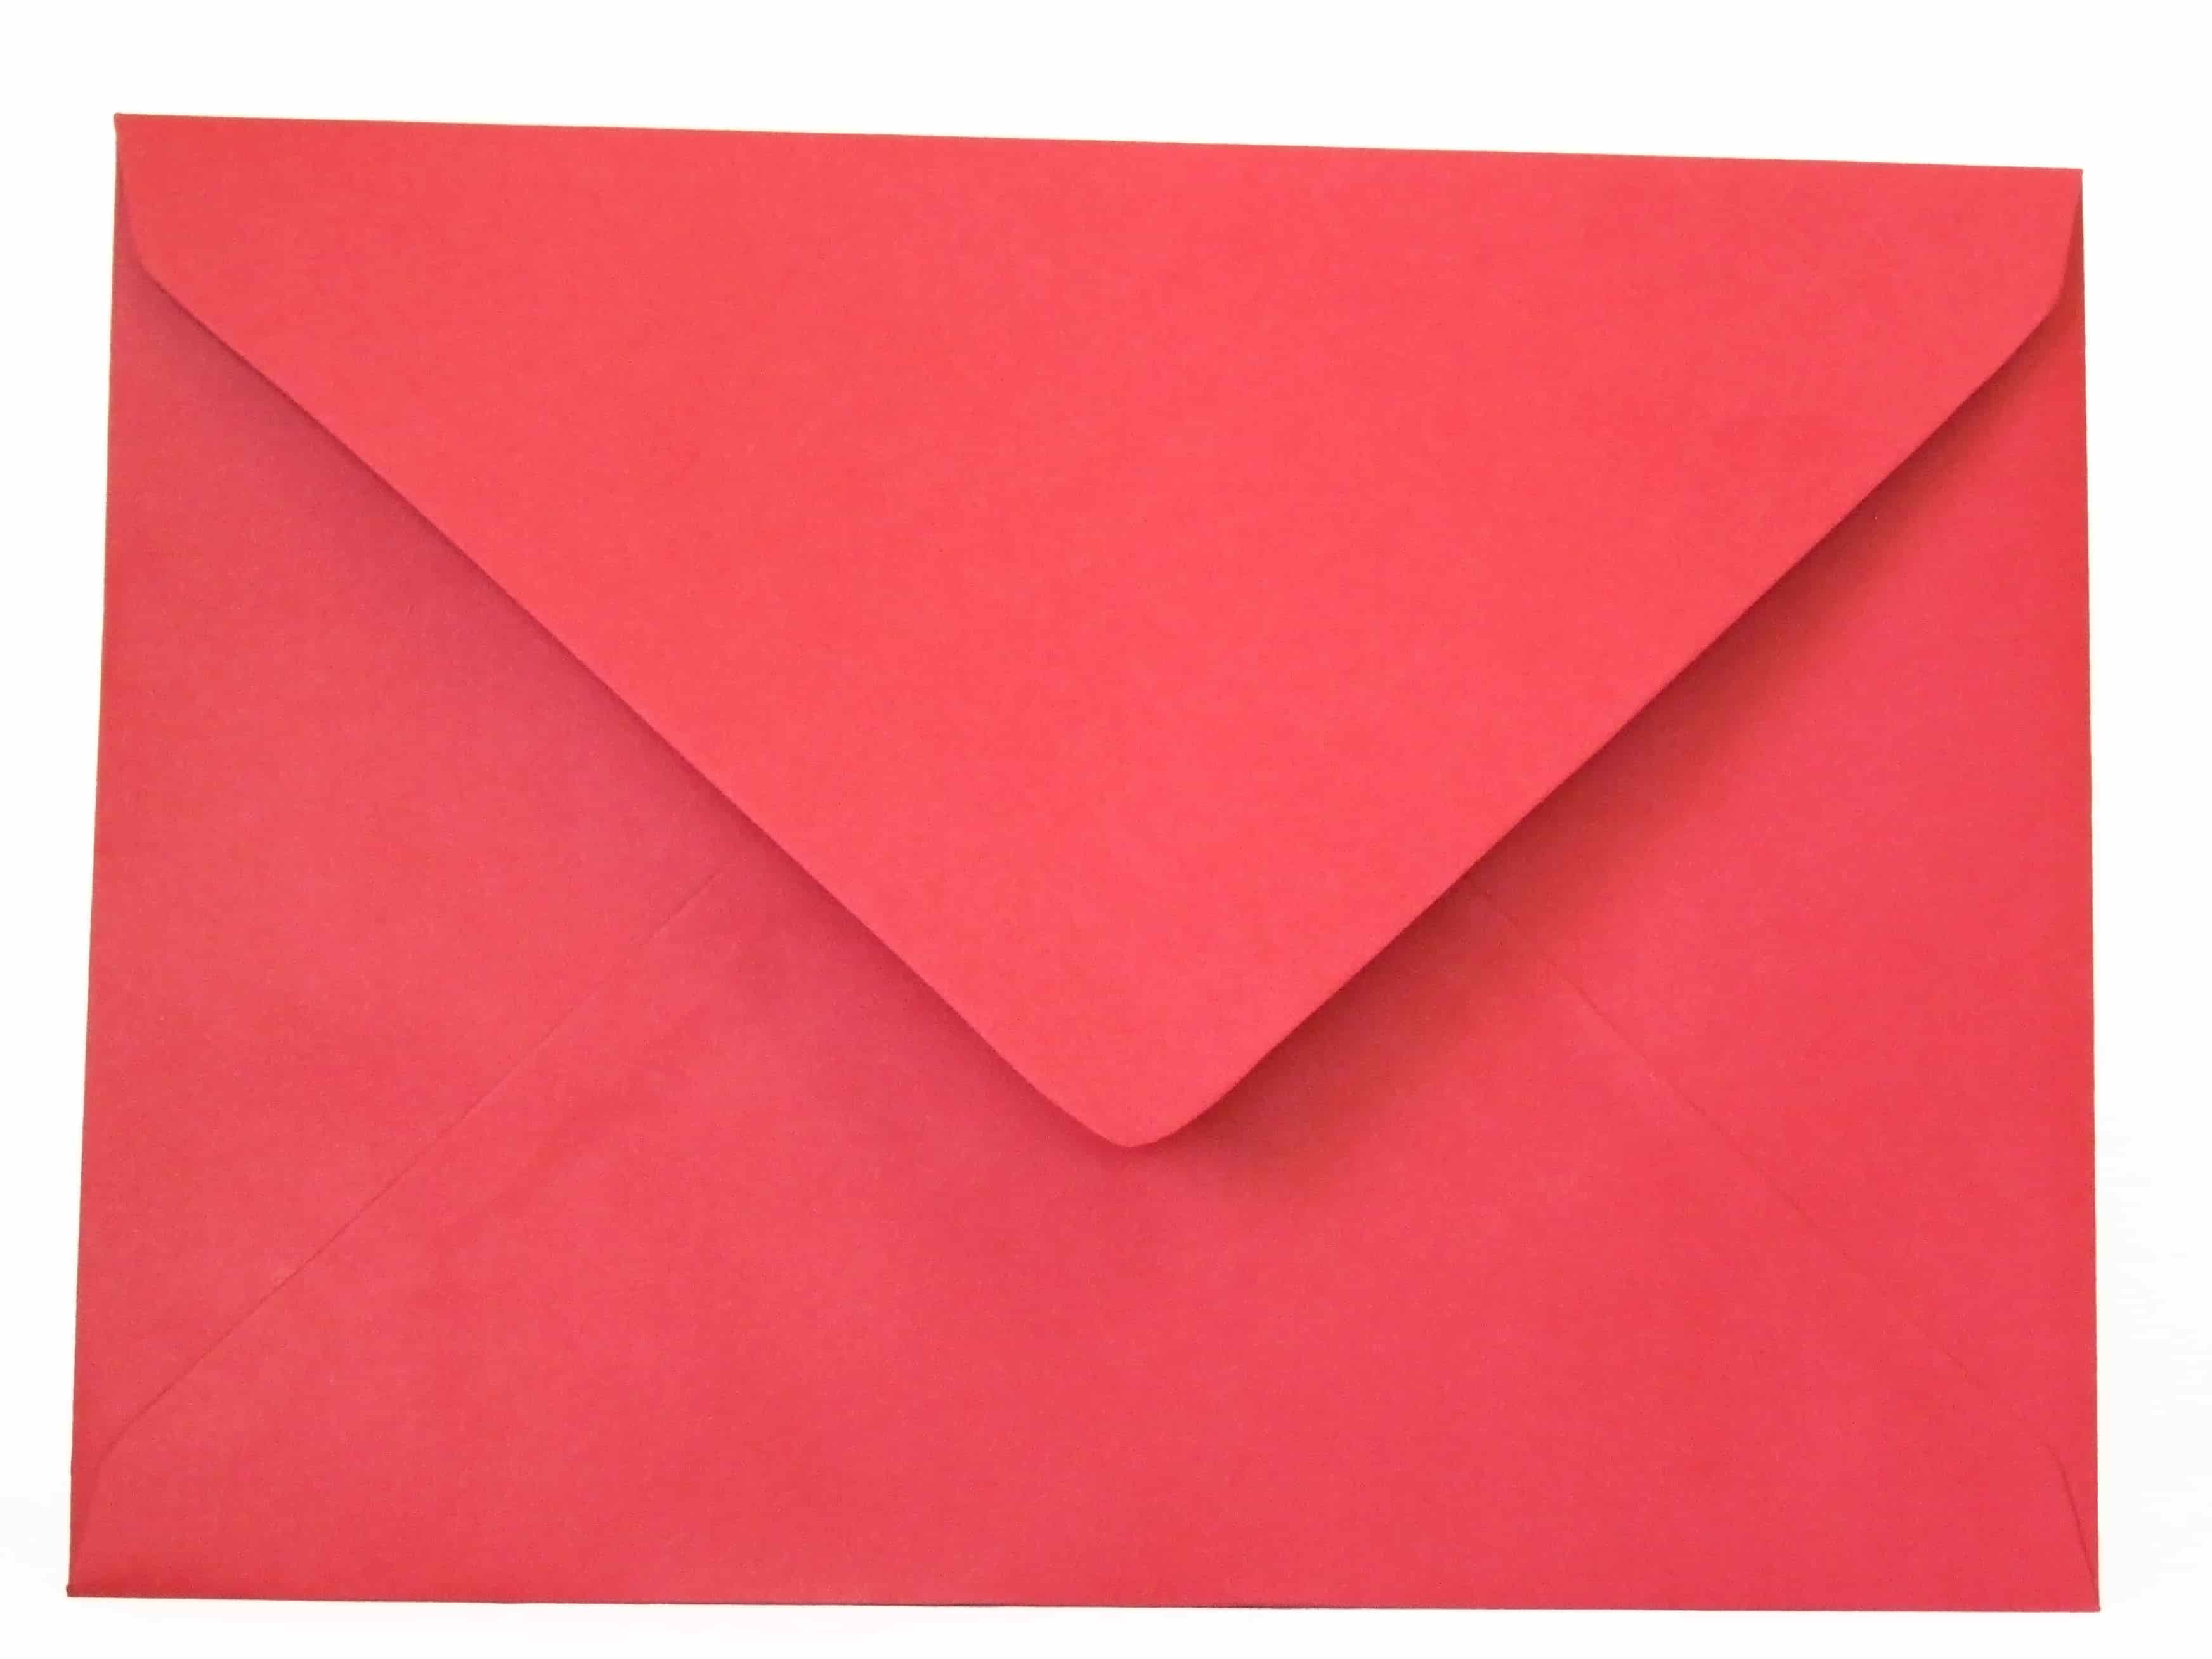 An image of a red envelope